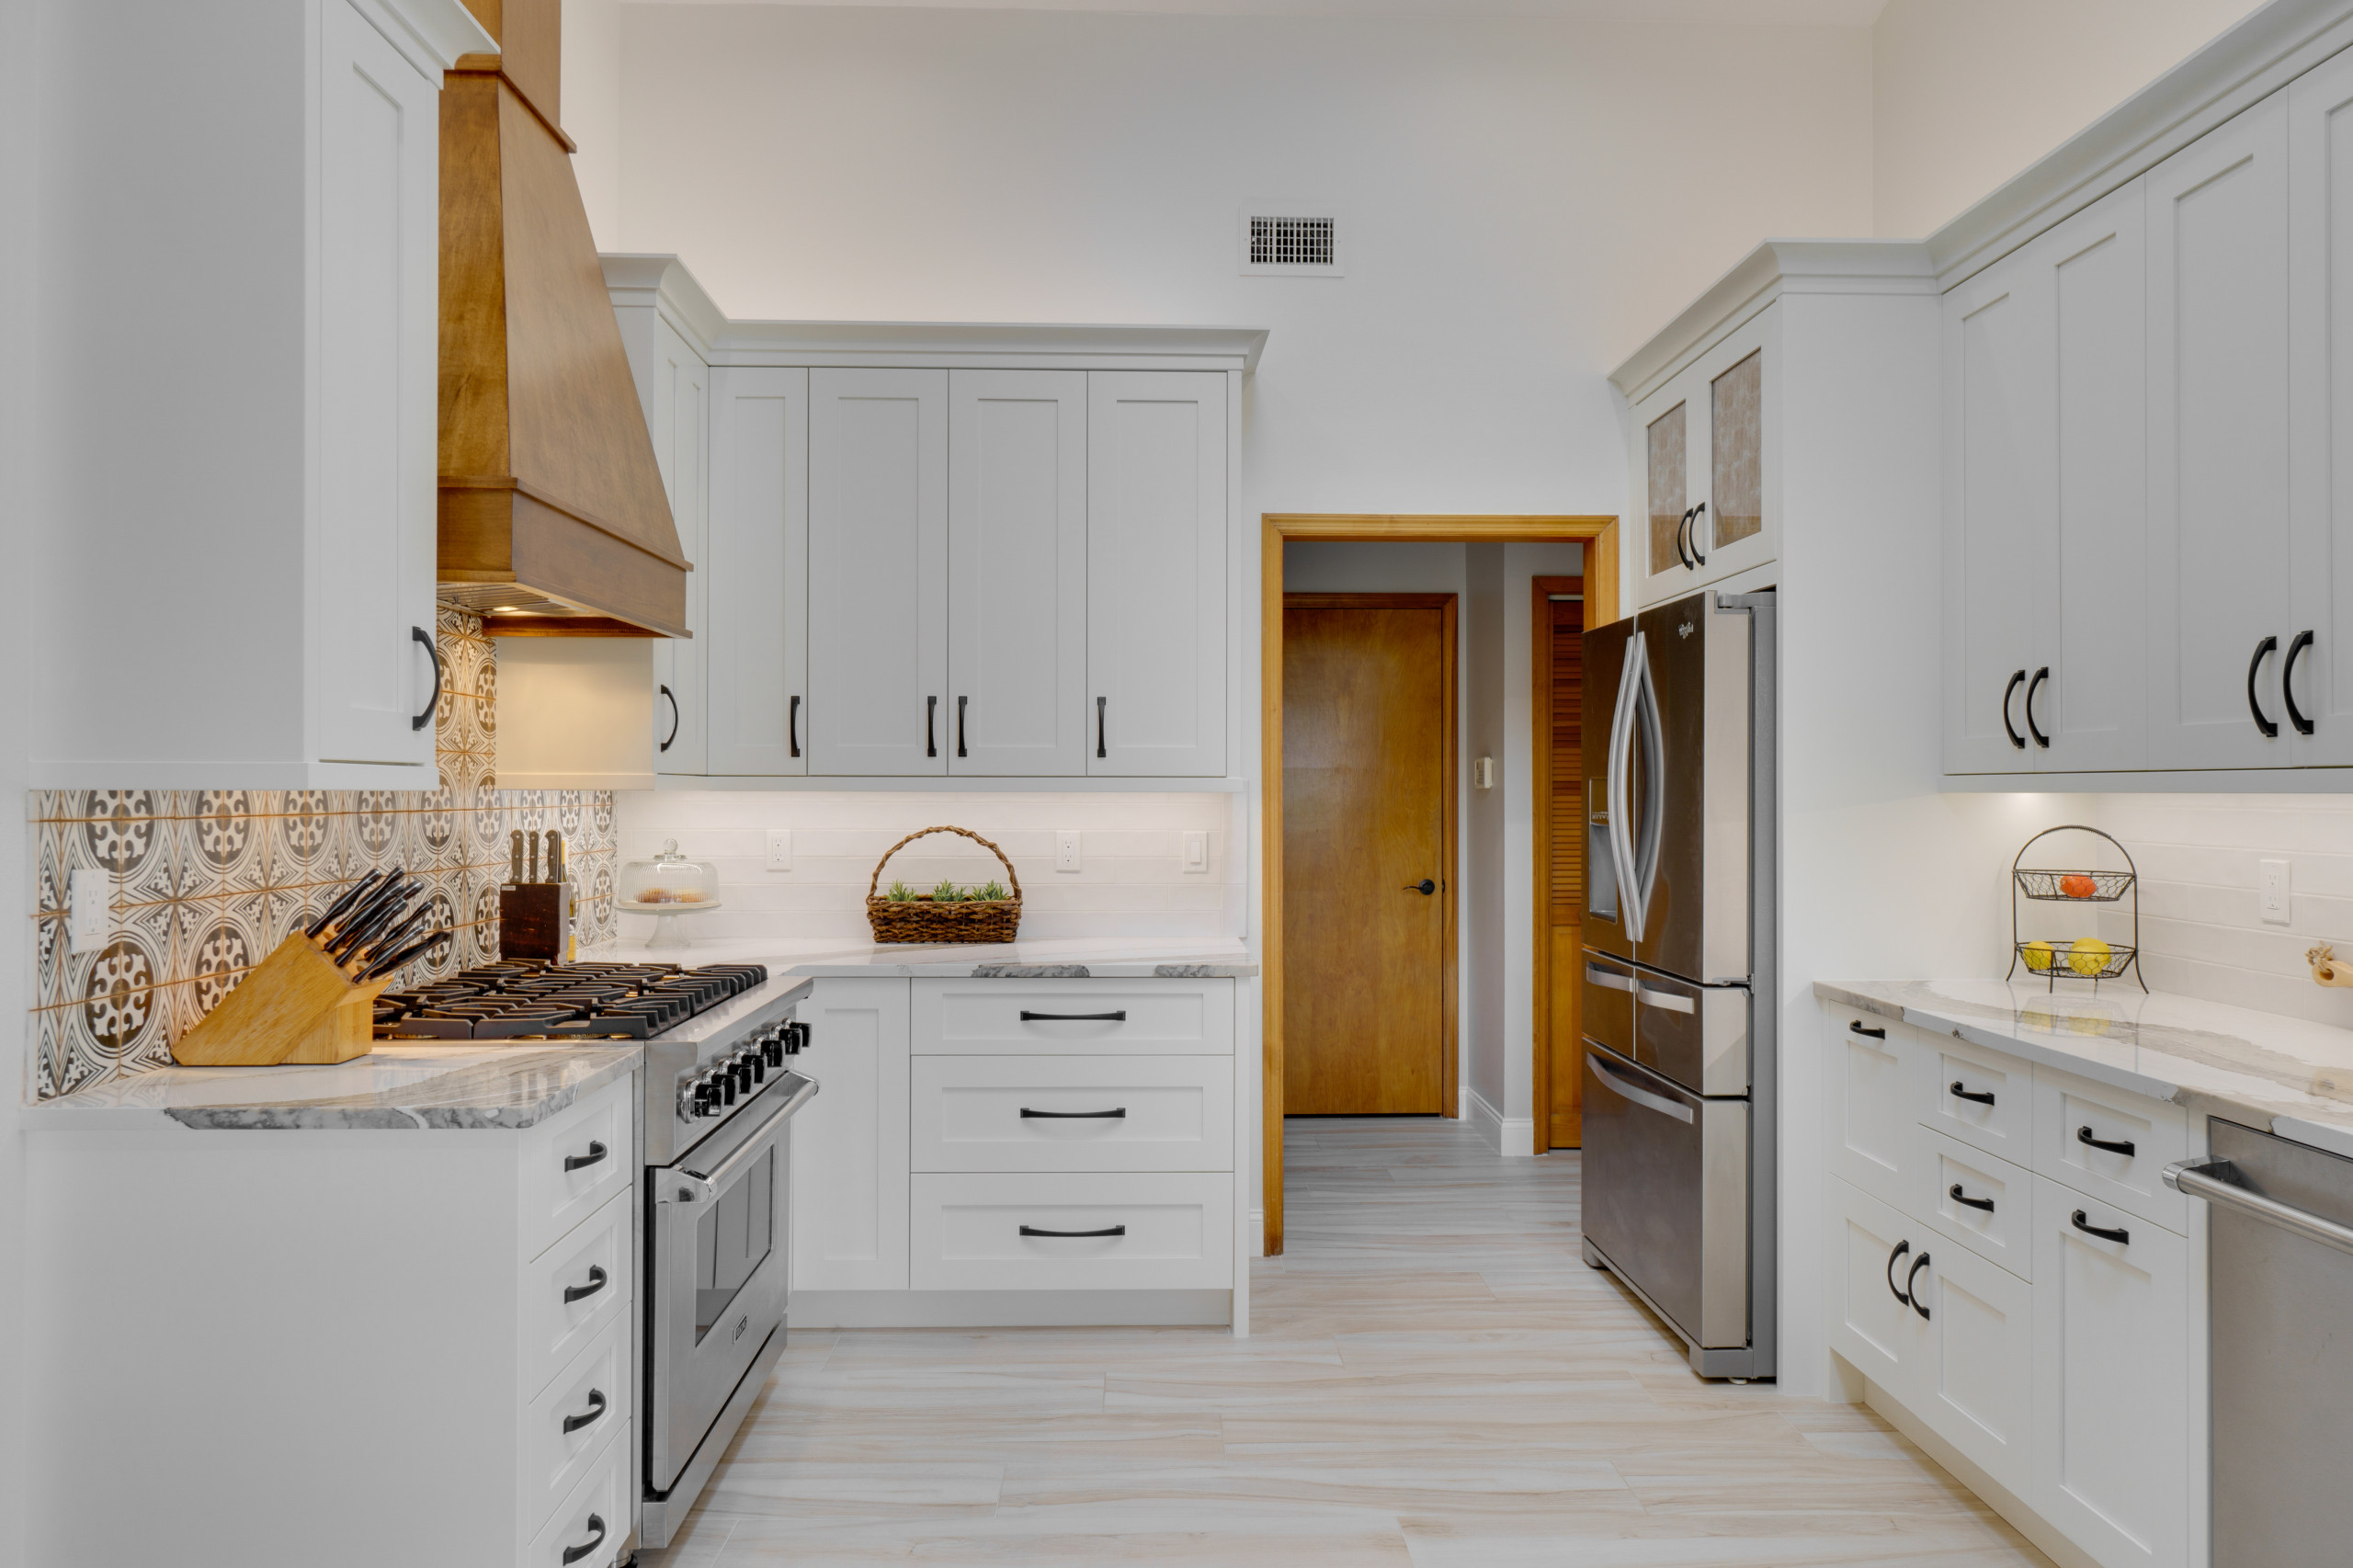 Kitchen Remodel in Painted Shaker with Stained Wood Accents